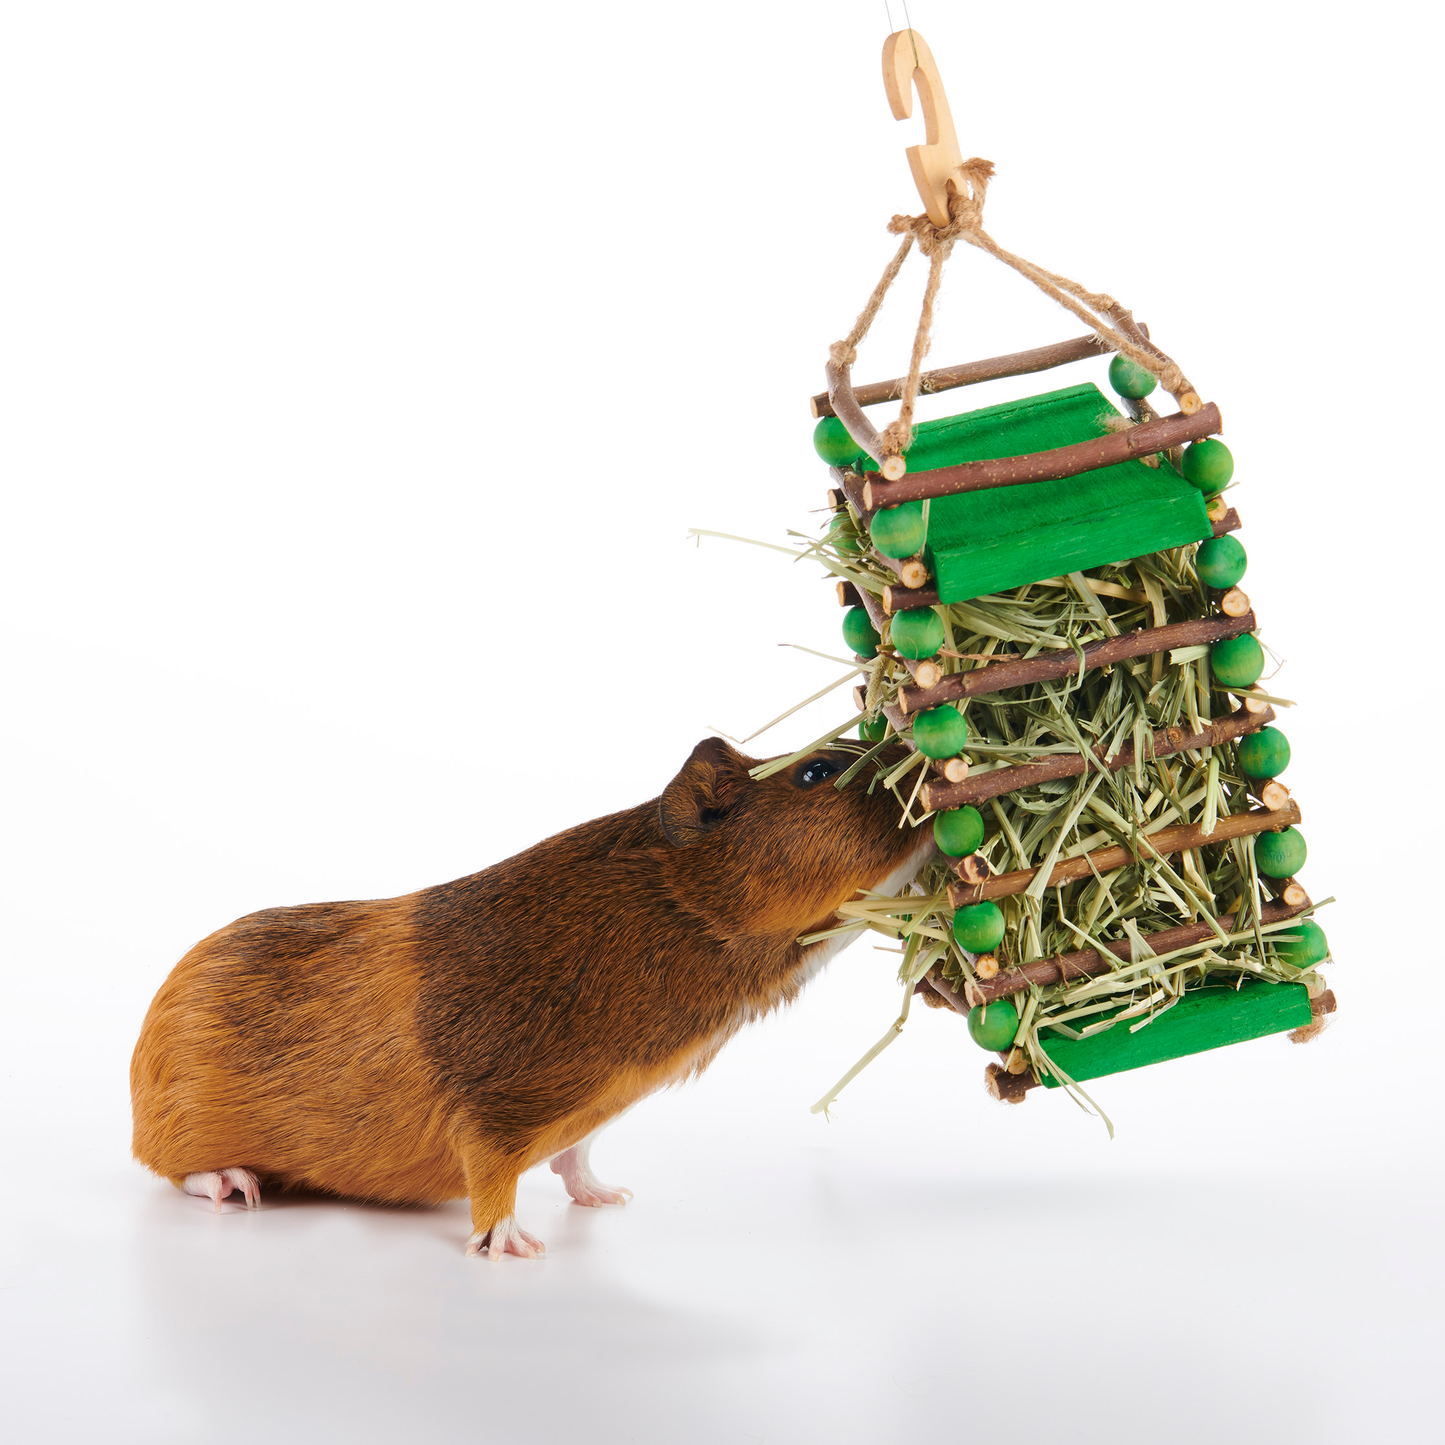 Oxbow® Enriched Life - Apple Stick Hay Feeder